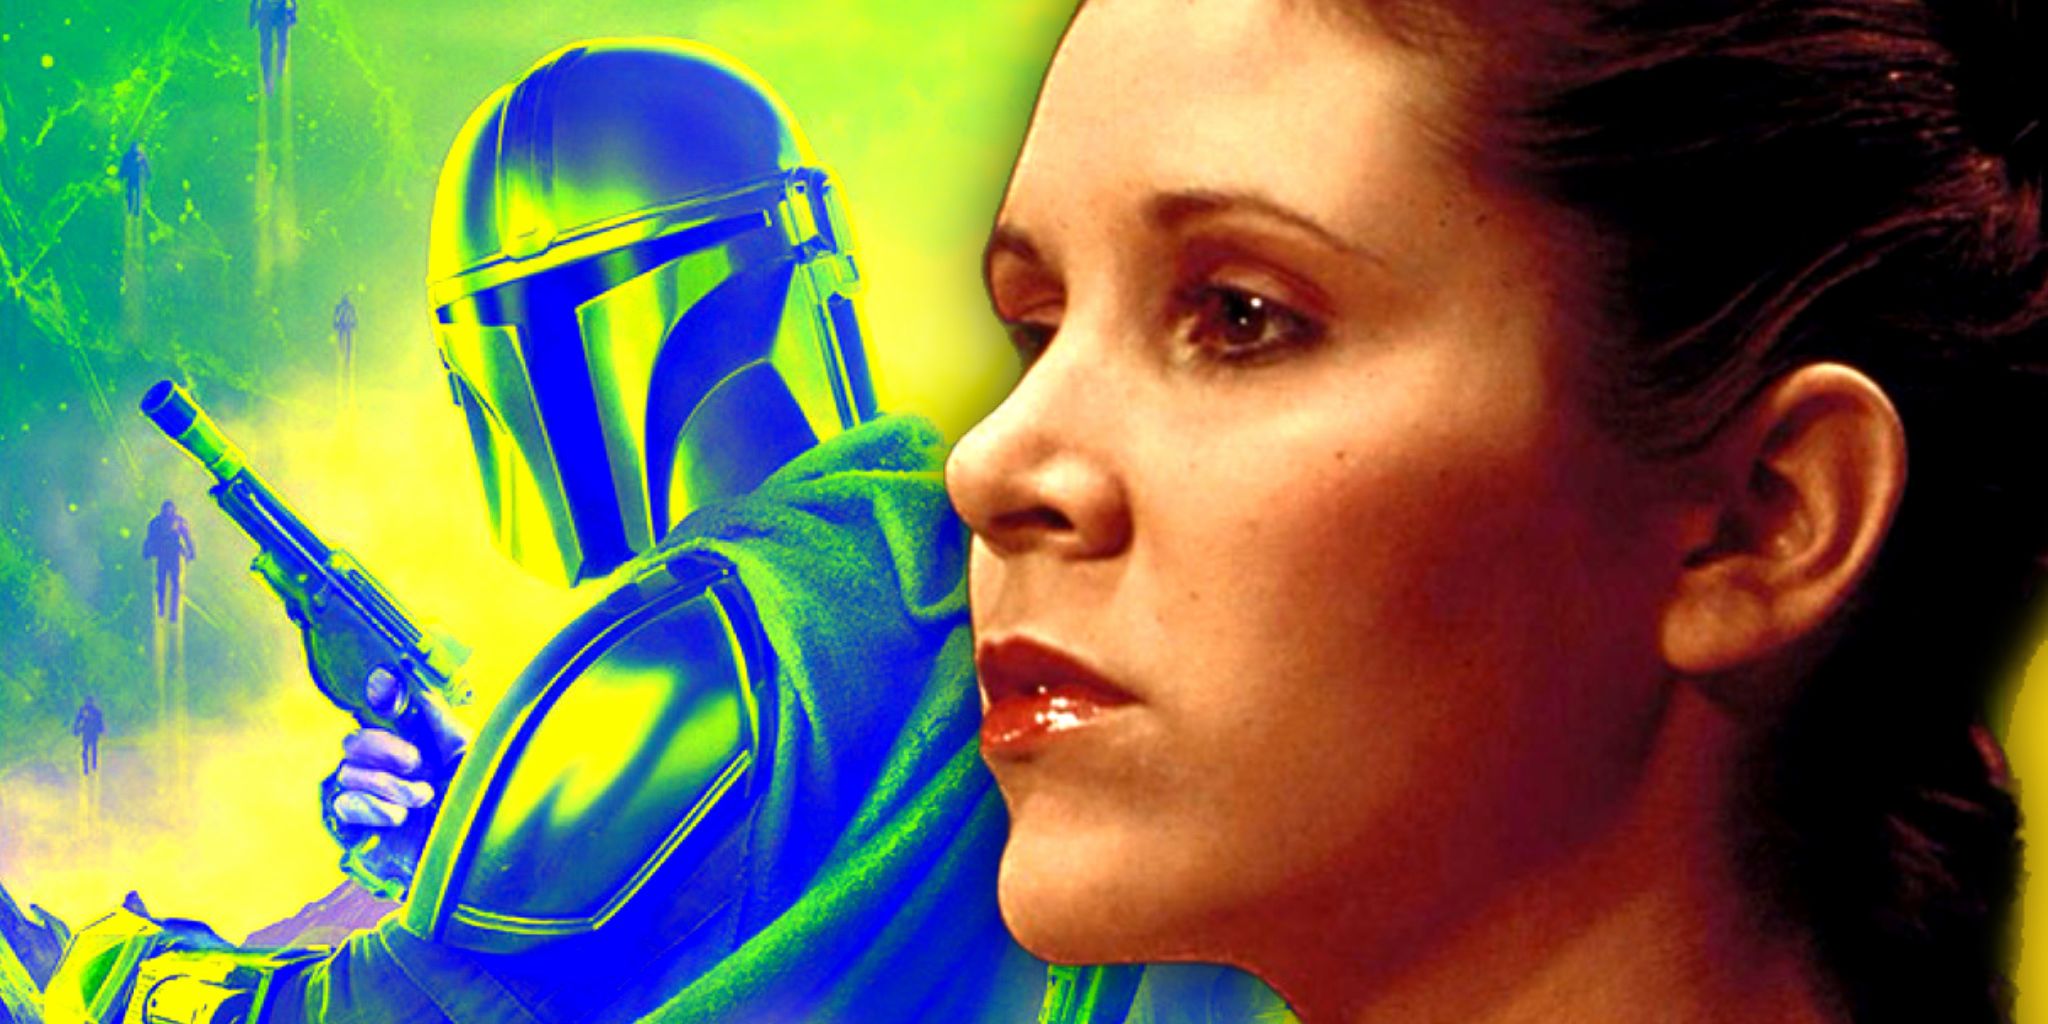 Princess Leia Organa in A New Hope, with The Mandalorian season 3 poster in the background